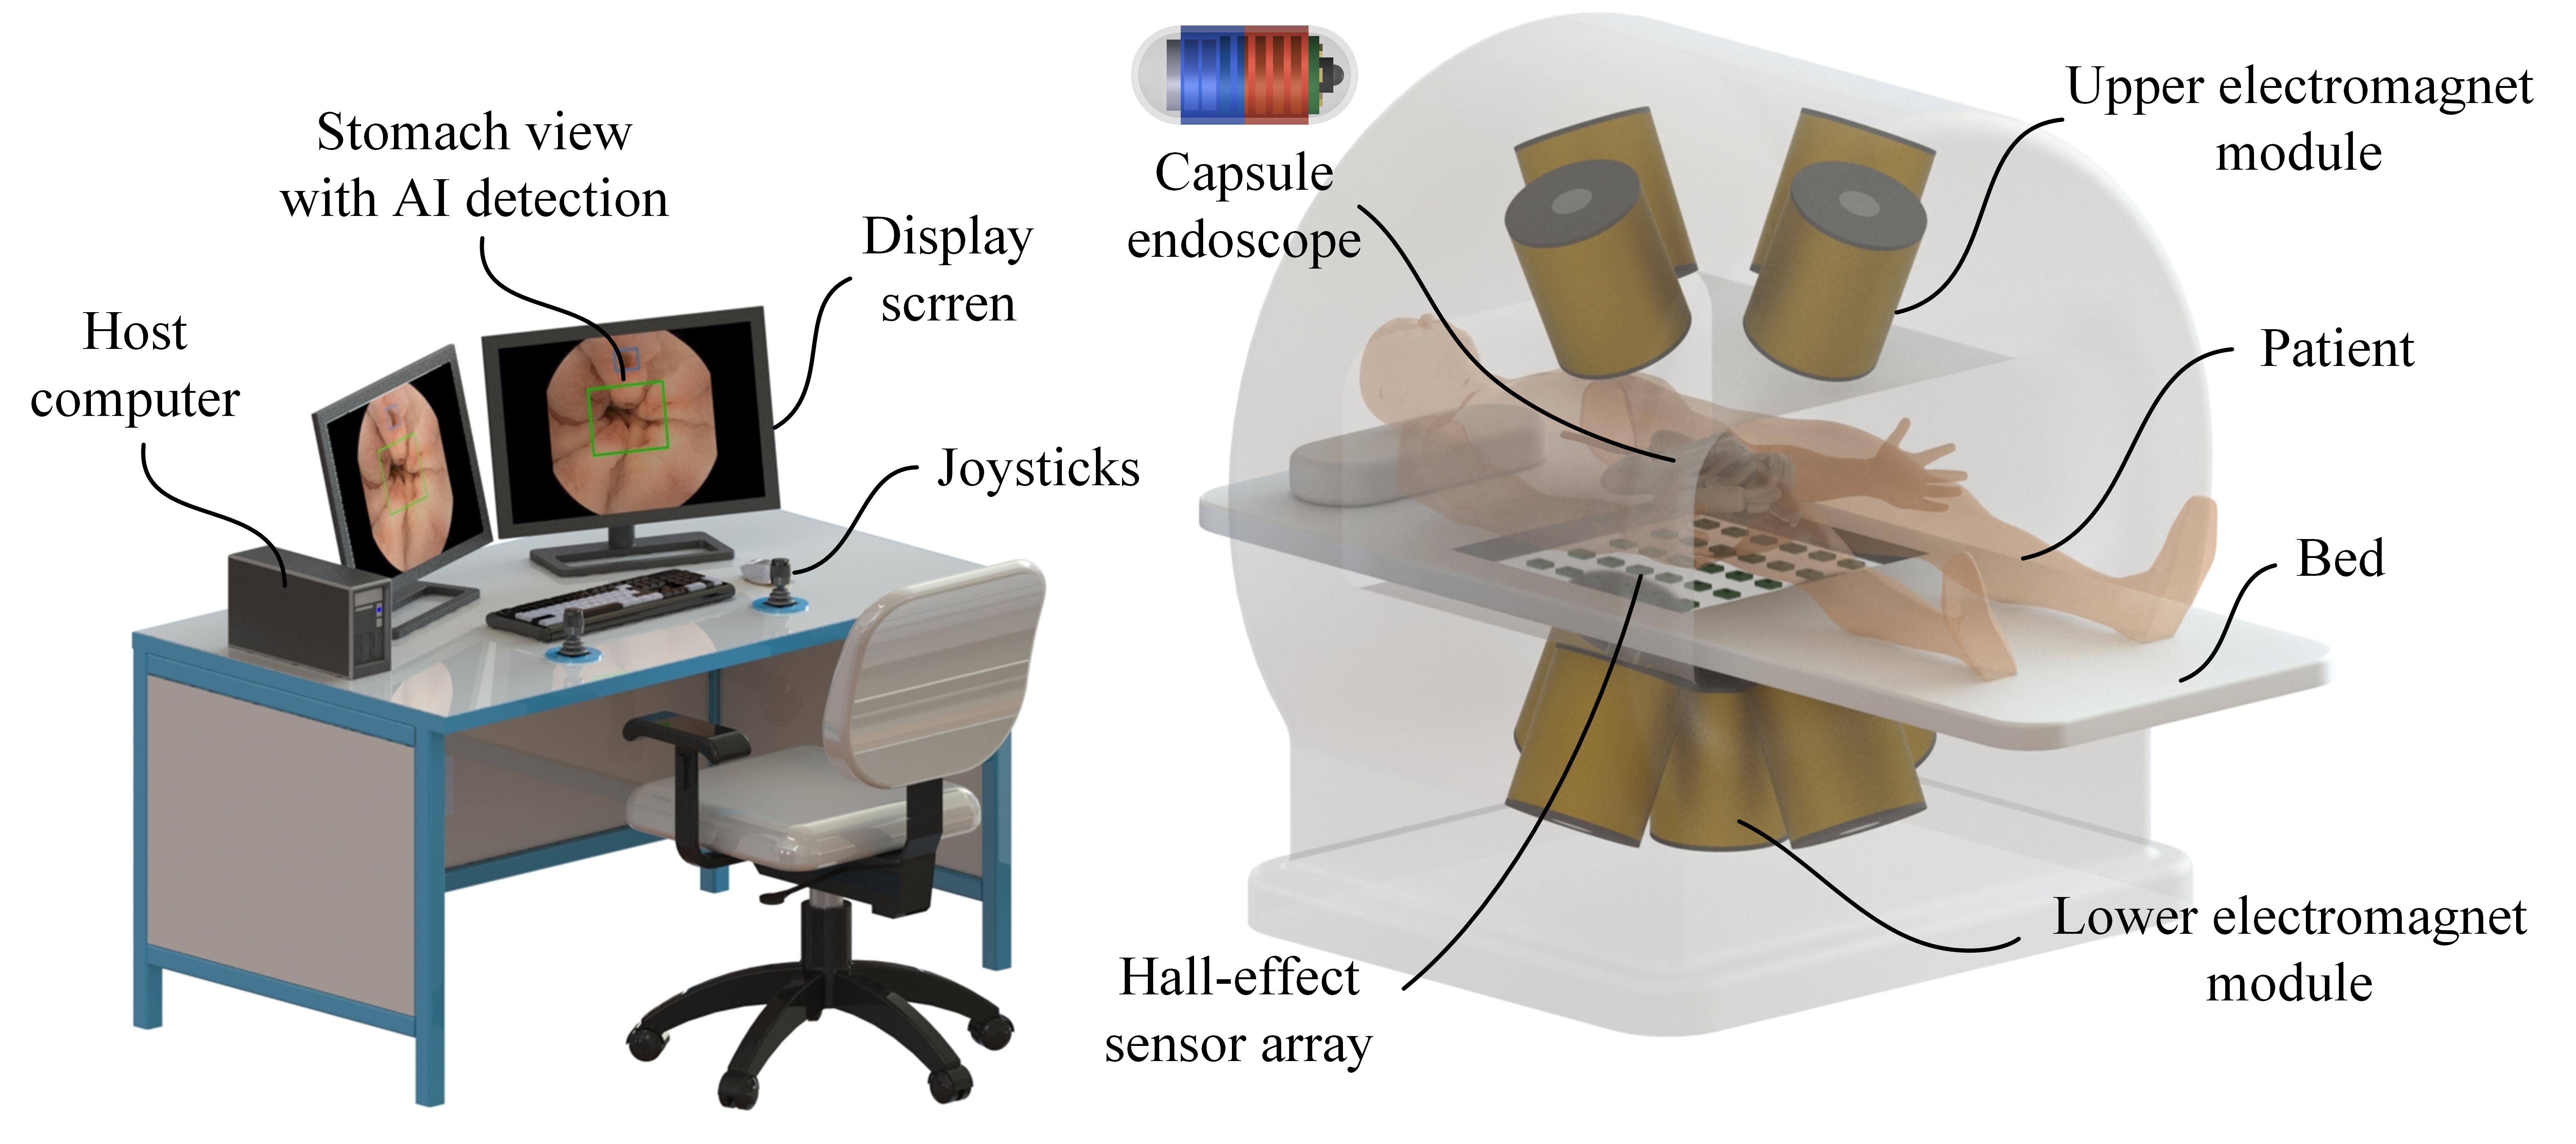 An automatic stomach screening method using magnetically actuated capsule endoscope